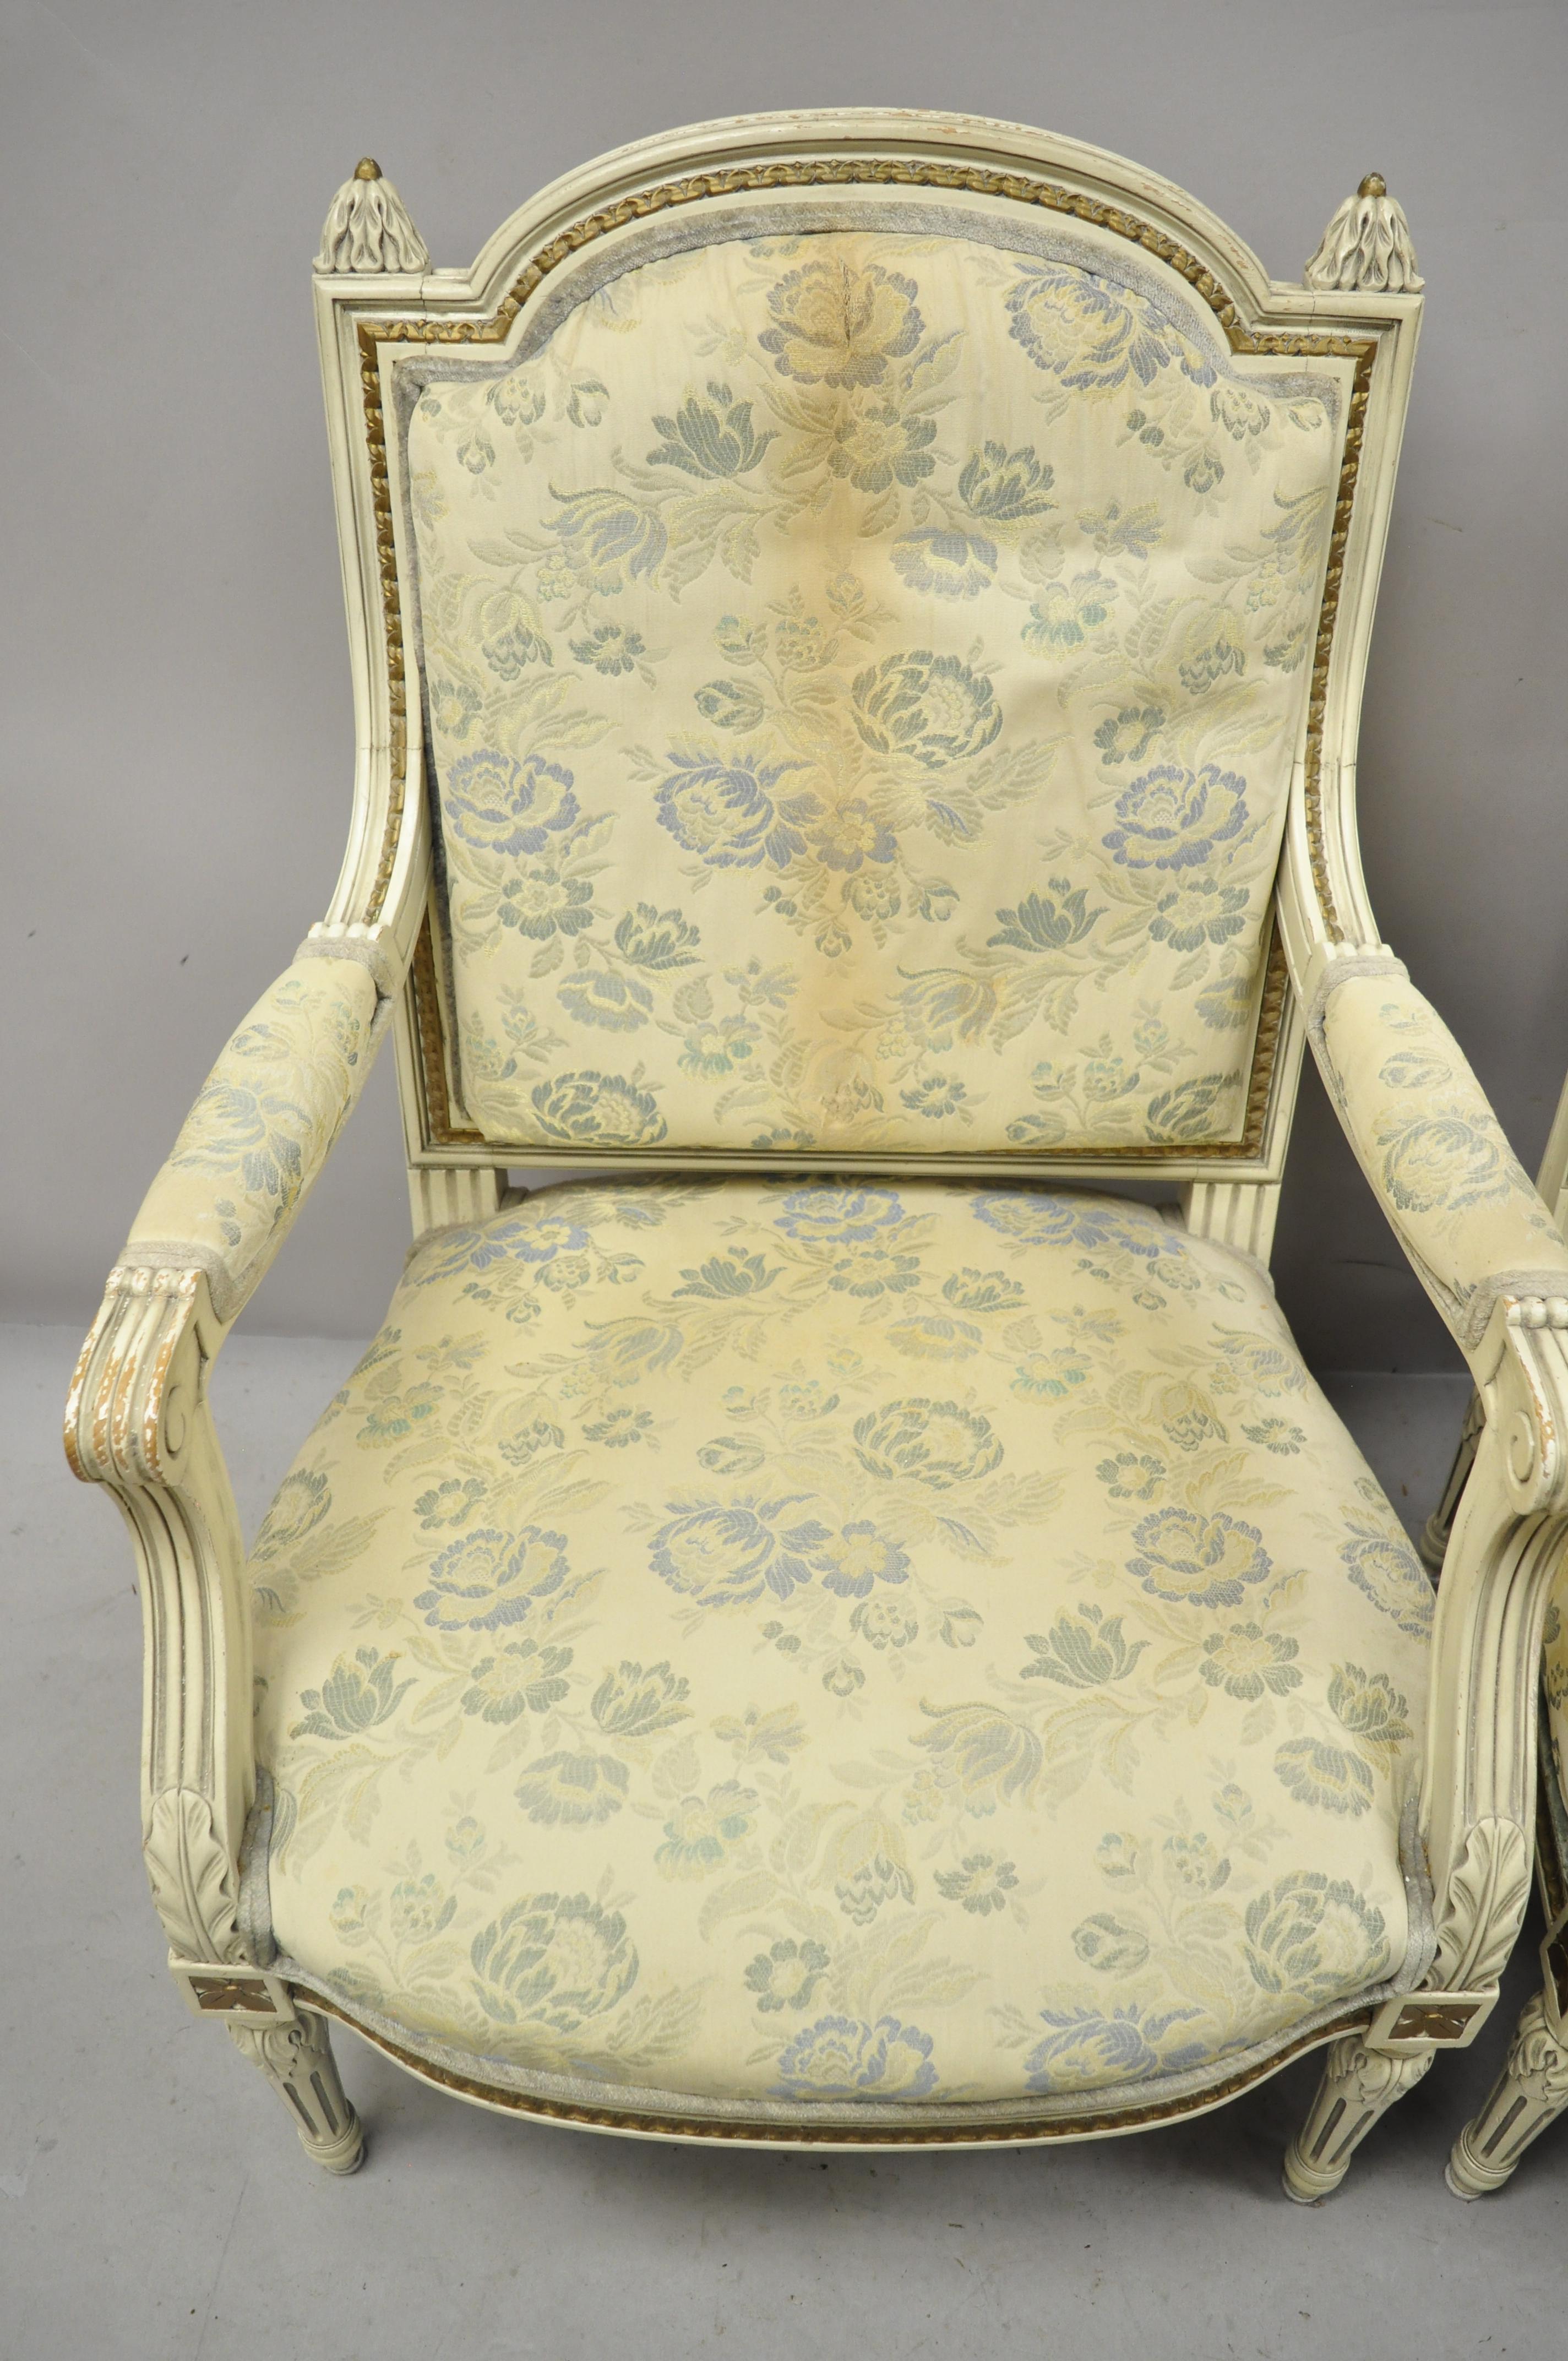 North American Vintage French Provincial Louis XVI Cream Painted Fauteuil Armchairs, a Pair For Sale